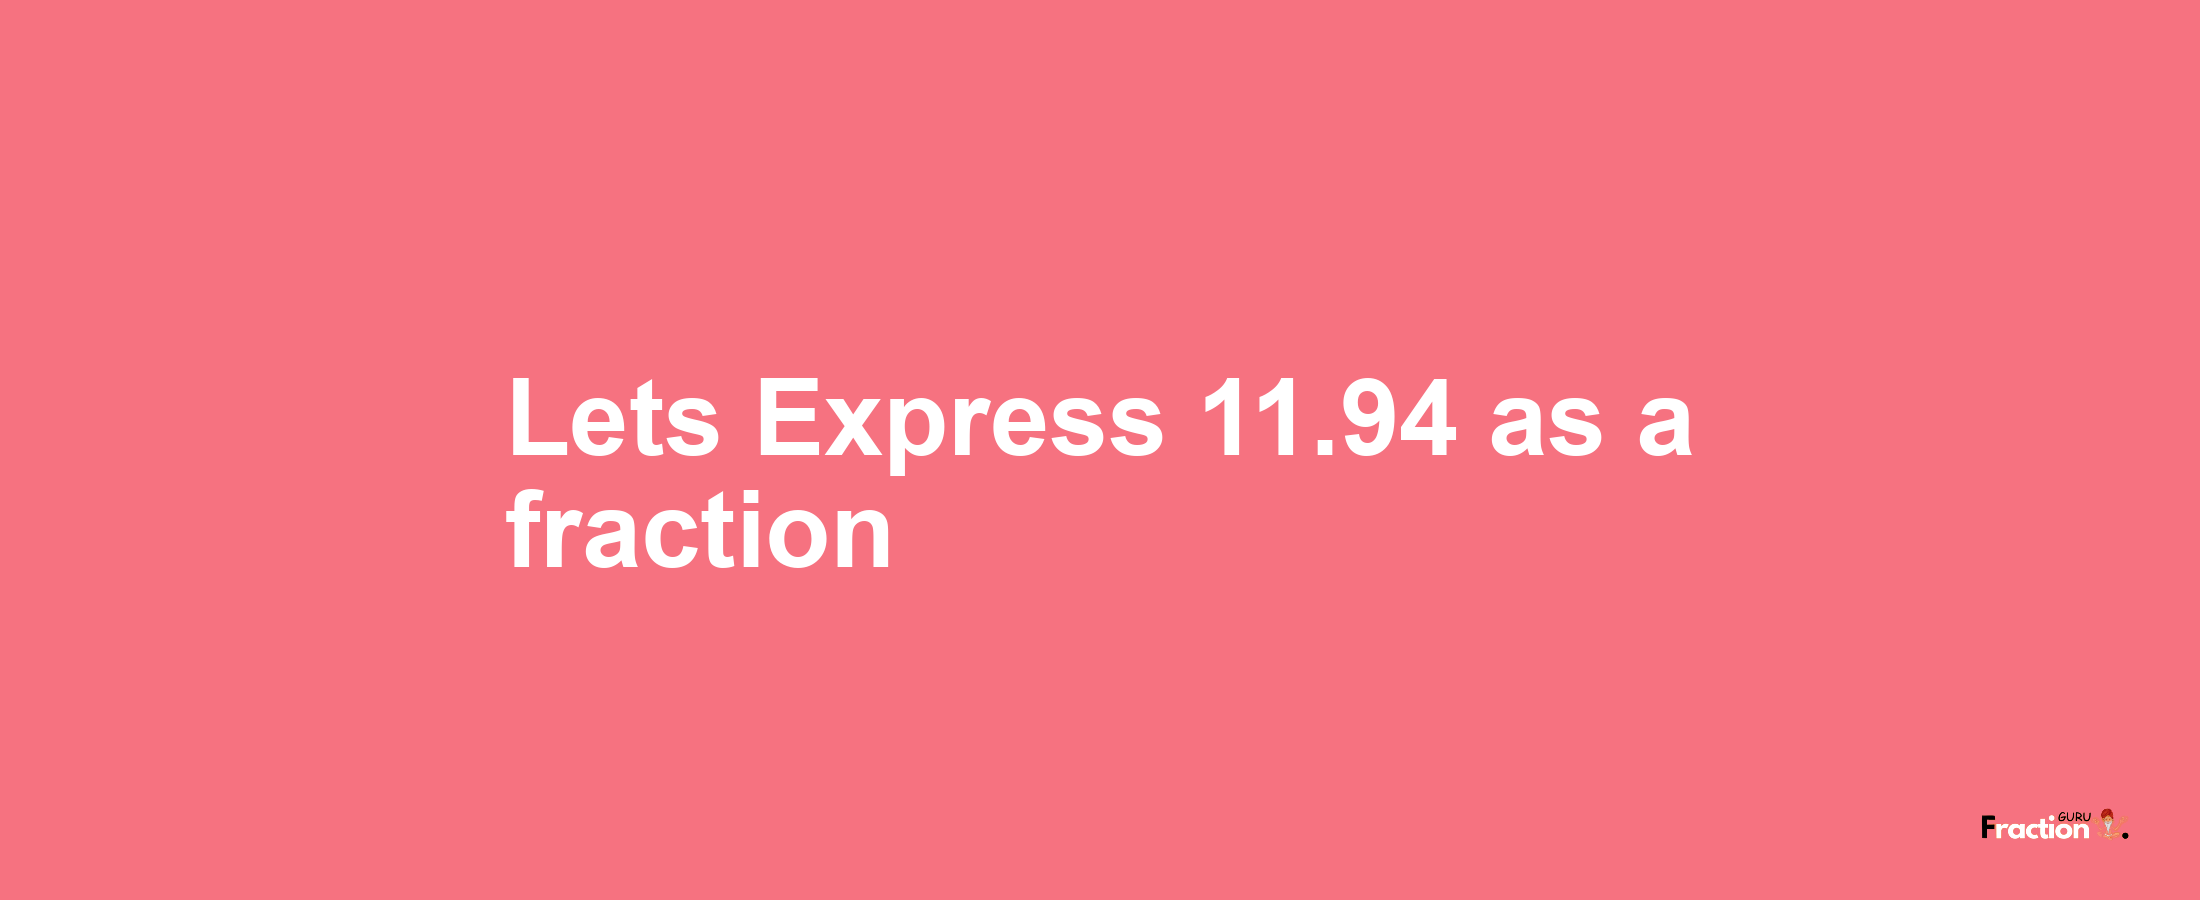 Lets Express 11.94 as afraction